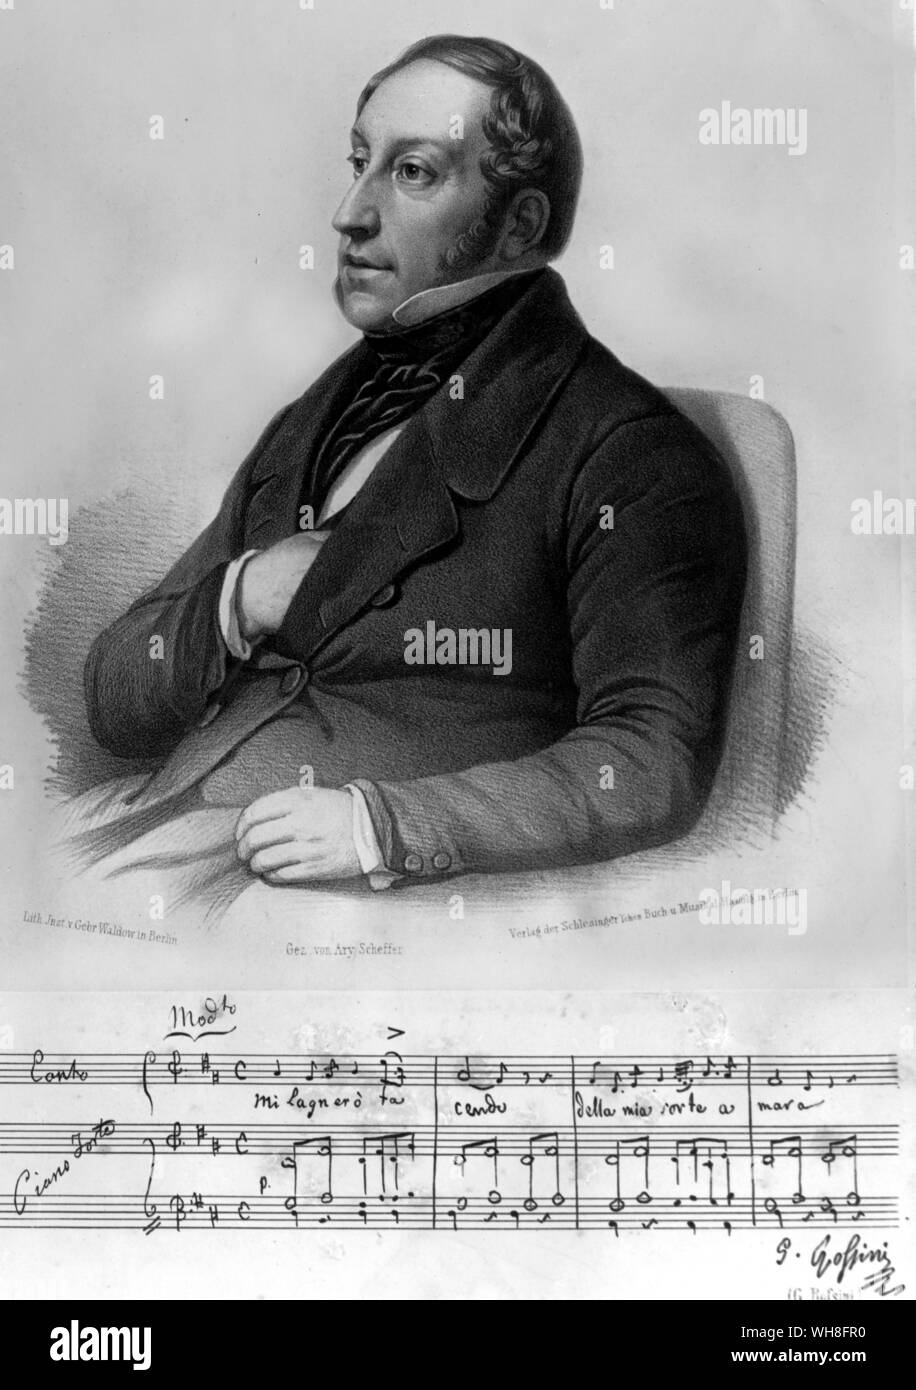 Portrait of Gioacchino Rossini, (1792-1868), Italian composer. On Wings of Song by Wilfred Blunt page 61.. . Stock Photo